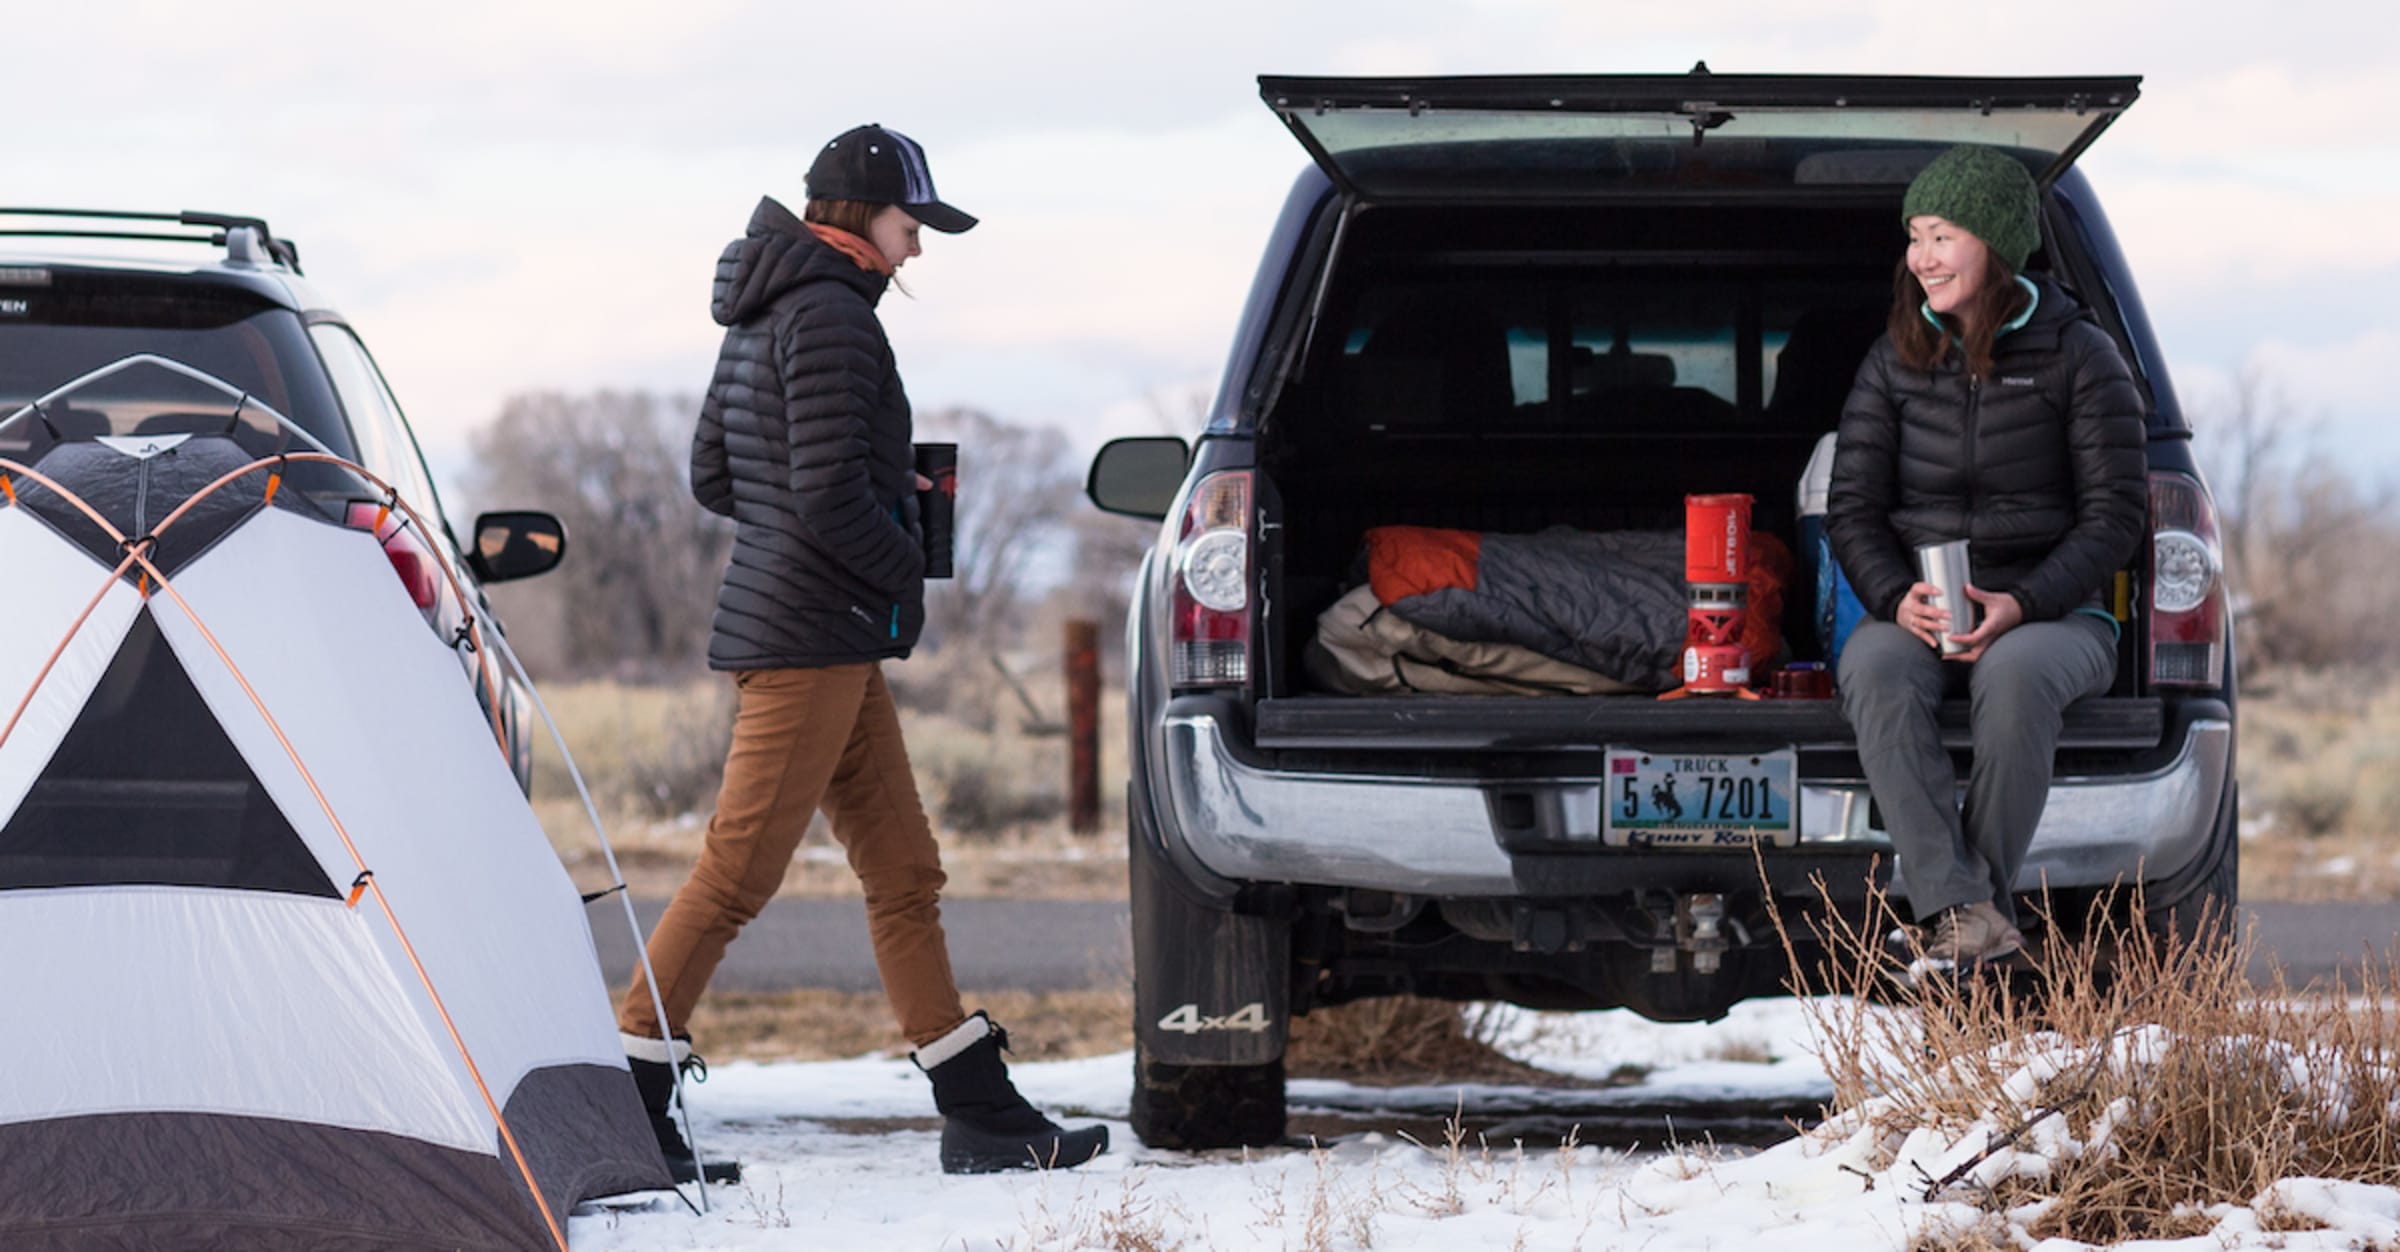 Winterize Your Campground: How to Market Your Hipcamp Property for Winter